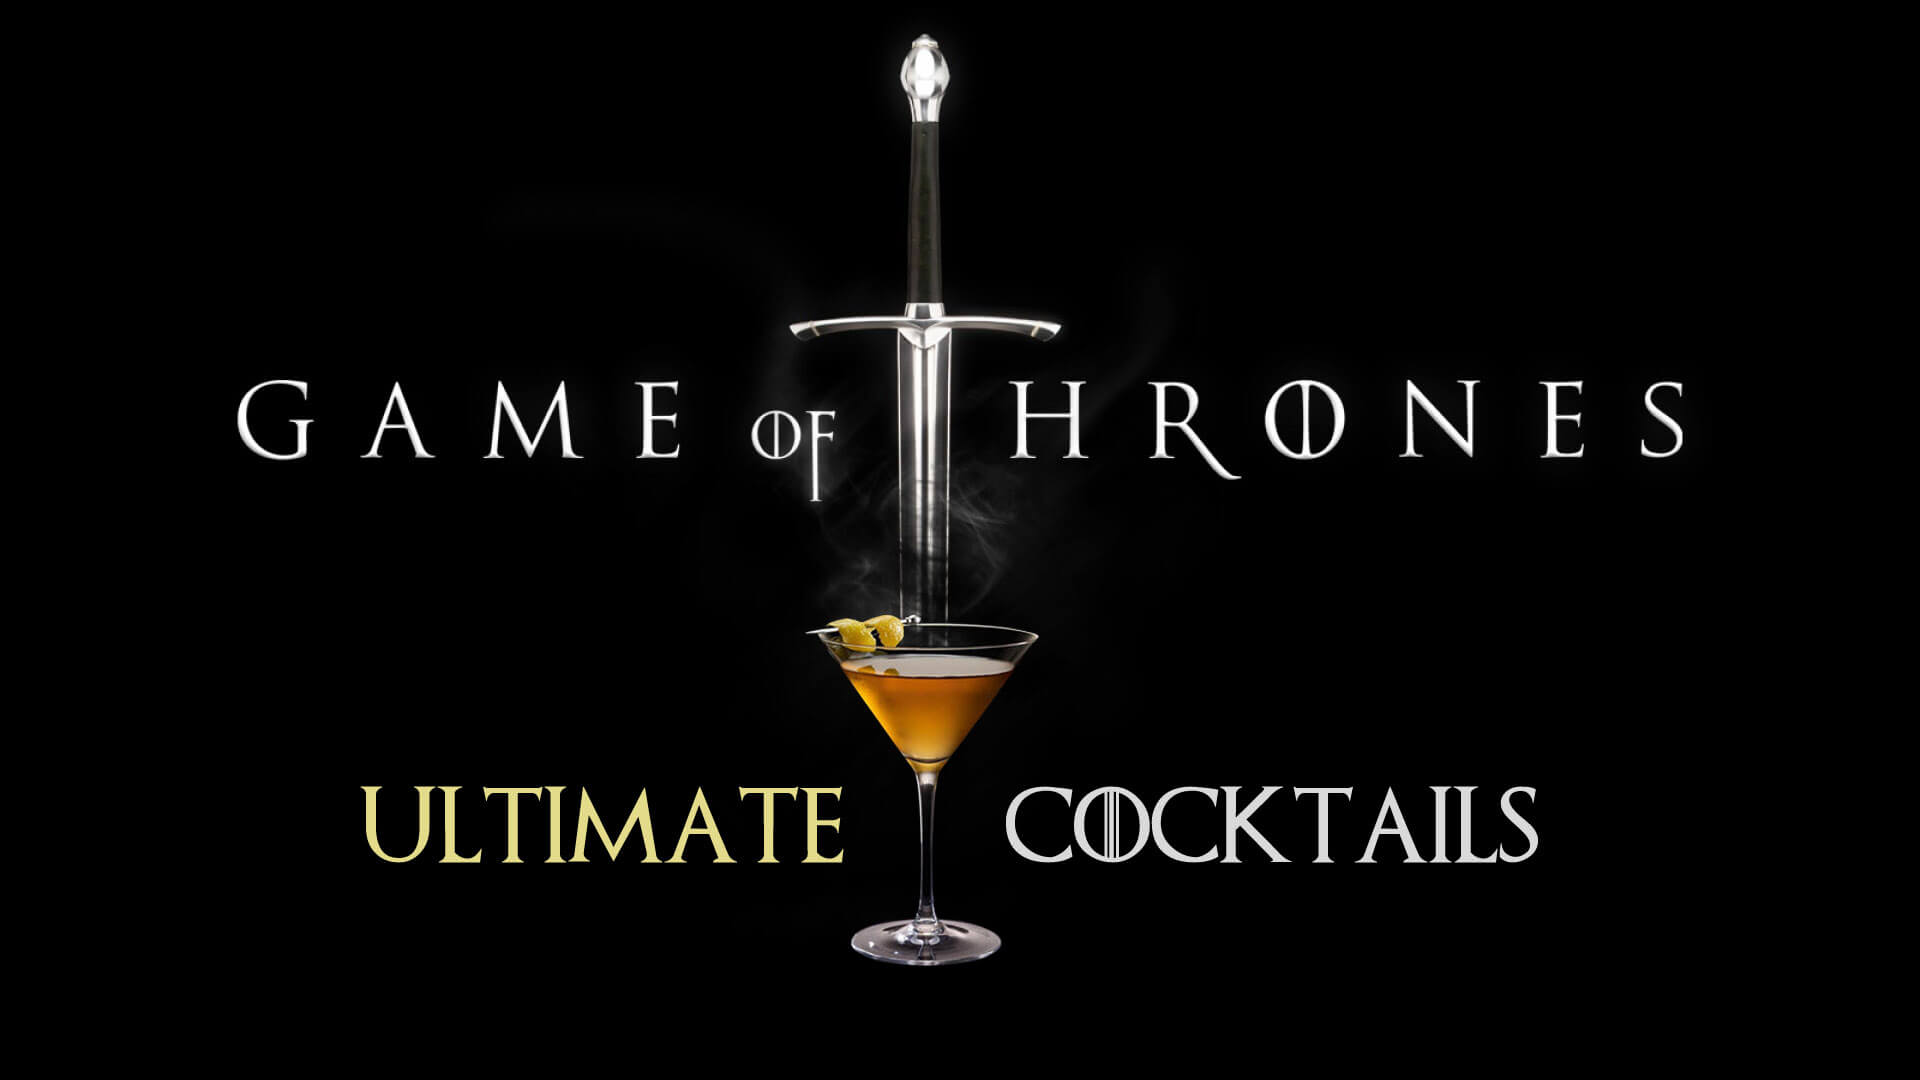 Game of Thrones Ultimate Cocktails List